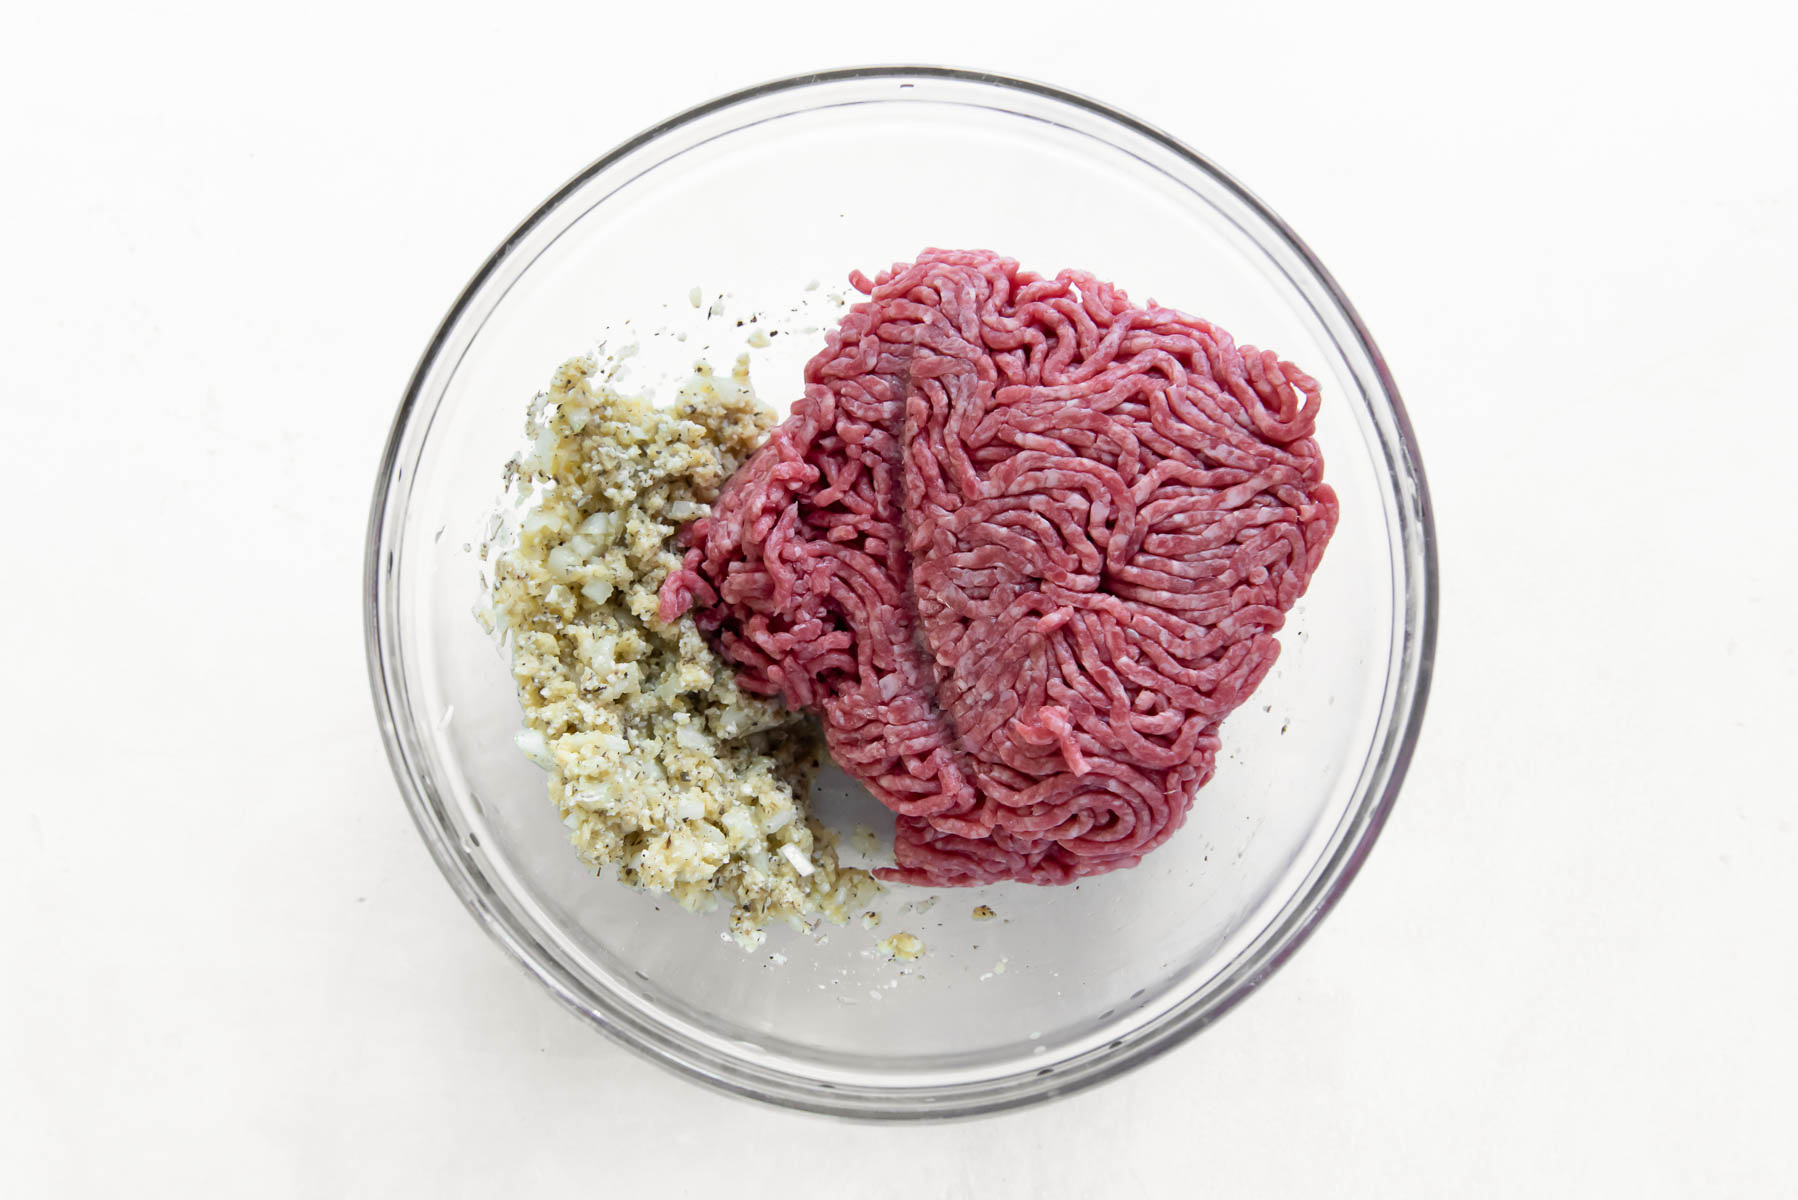 ground beef and other meatball ingredients in a glass bowl